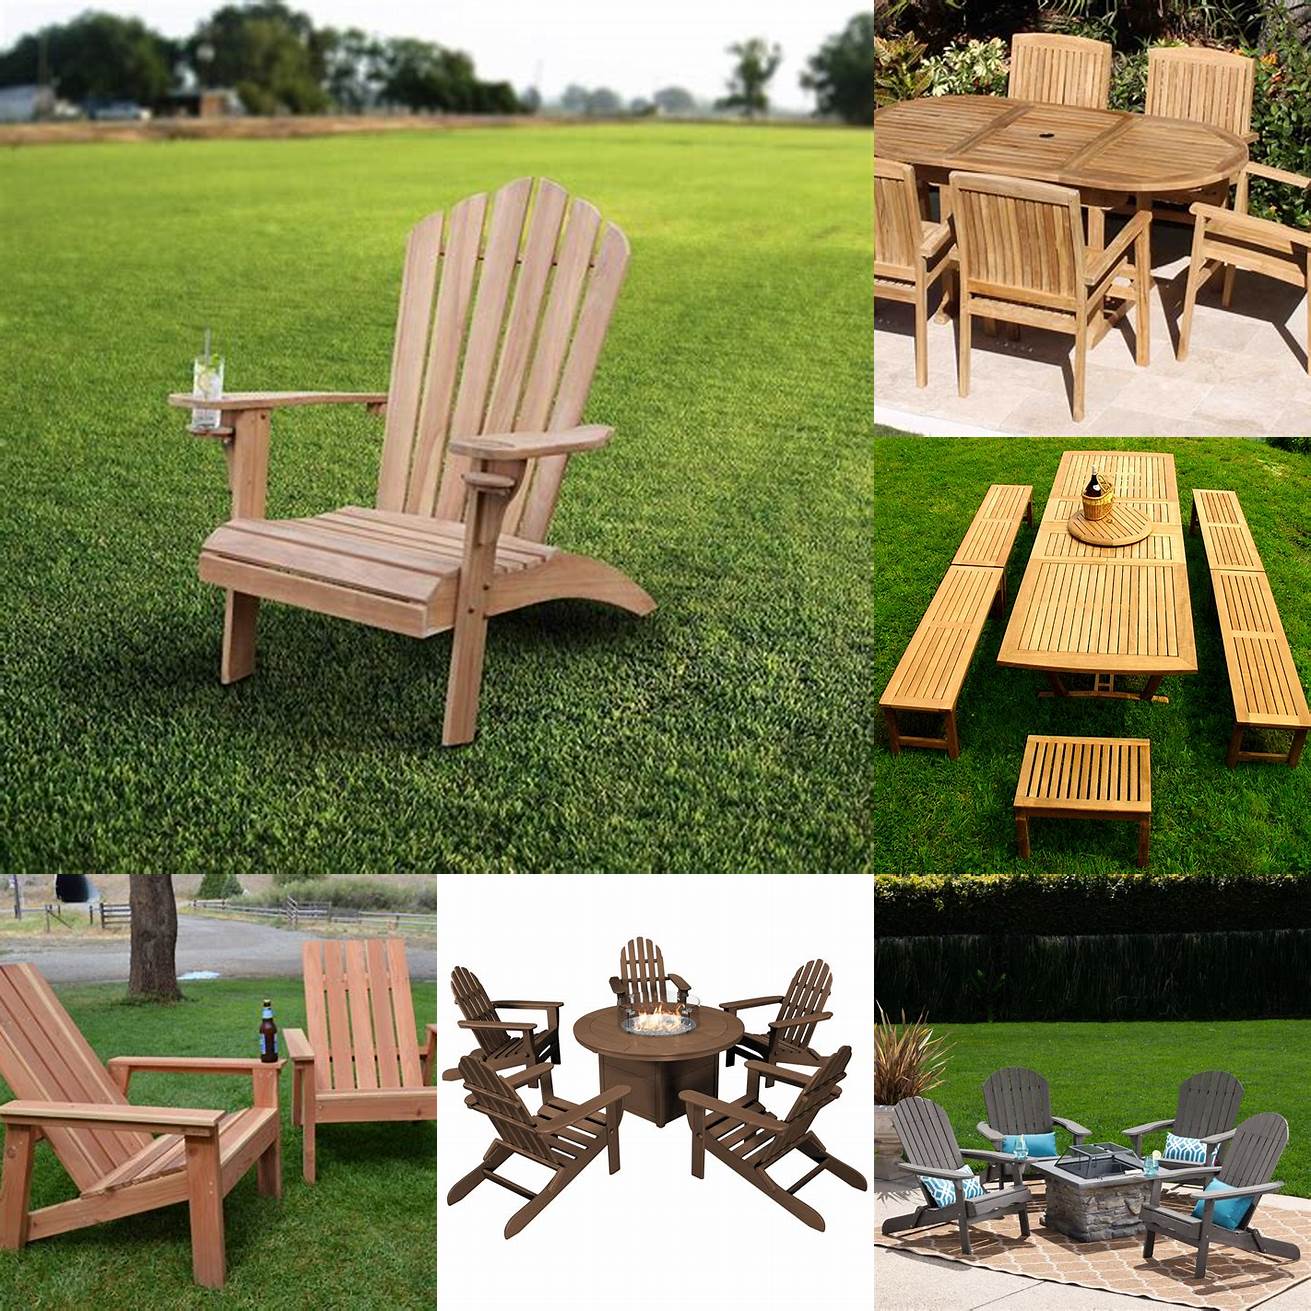 Teak Picnic Table with Adirondack Chairs